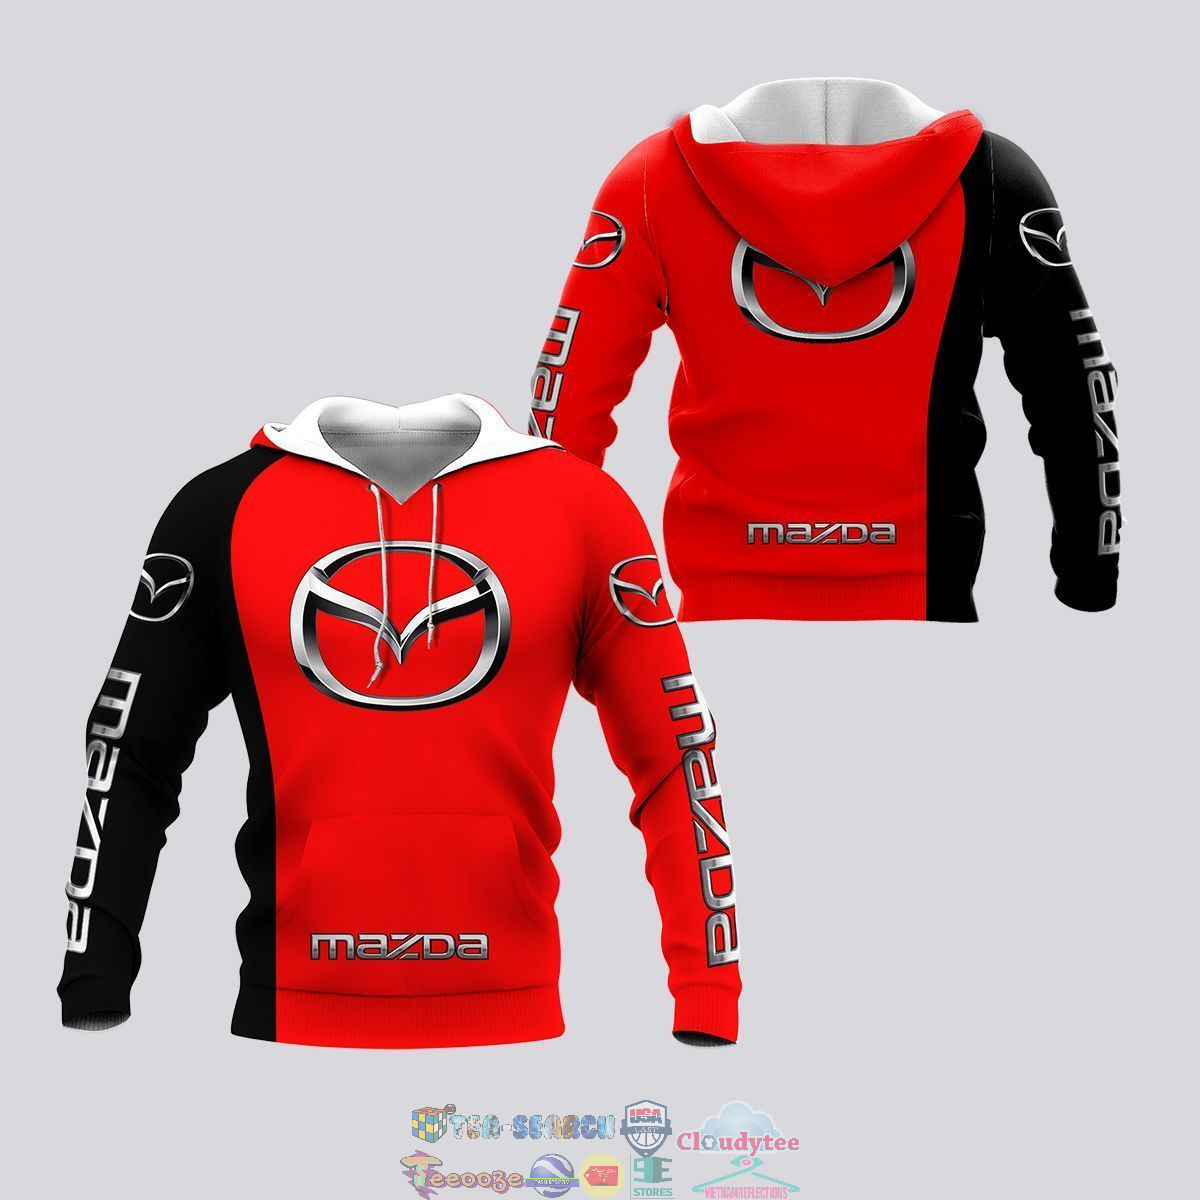 Mazda ver 16 3D hoodie and t-shirt